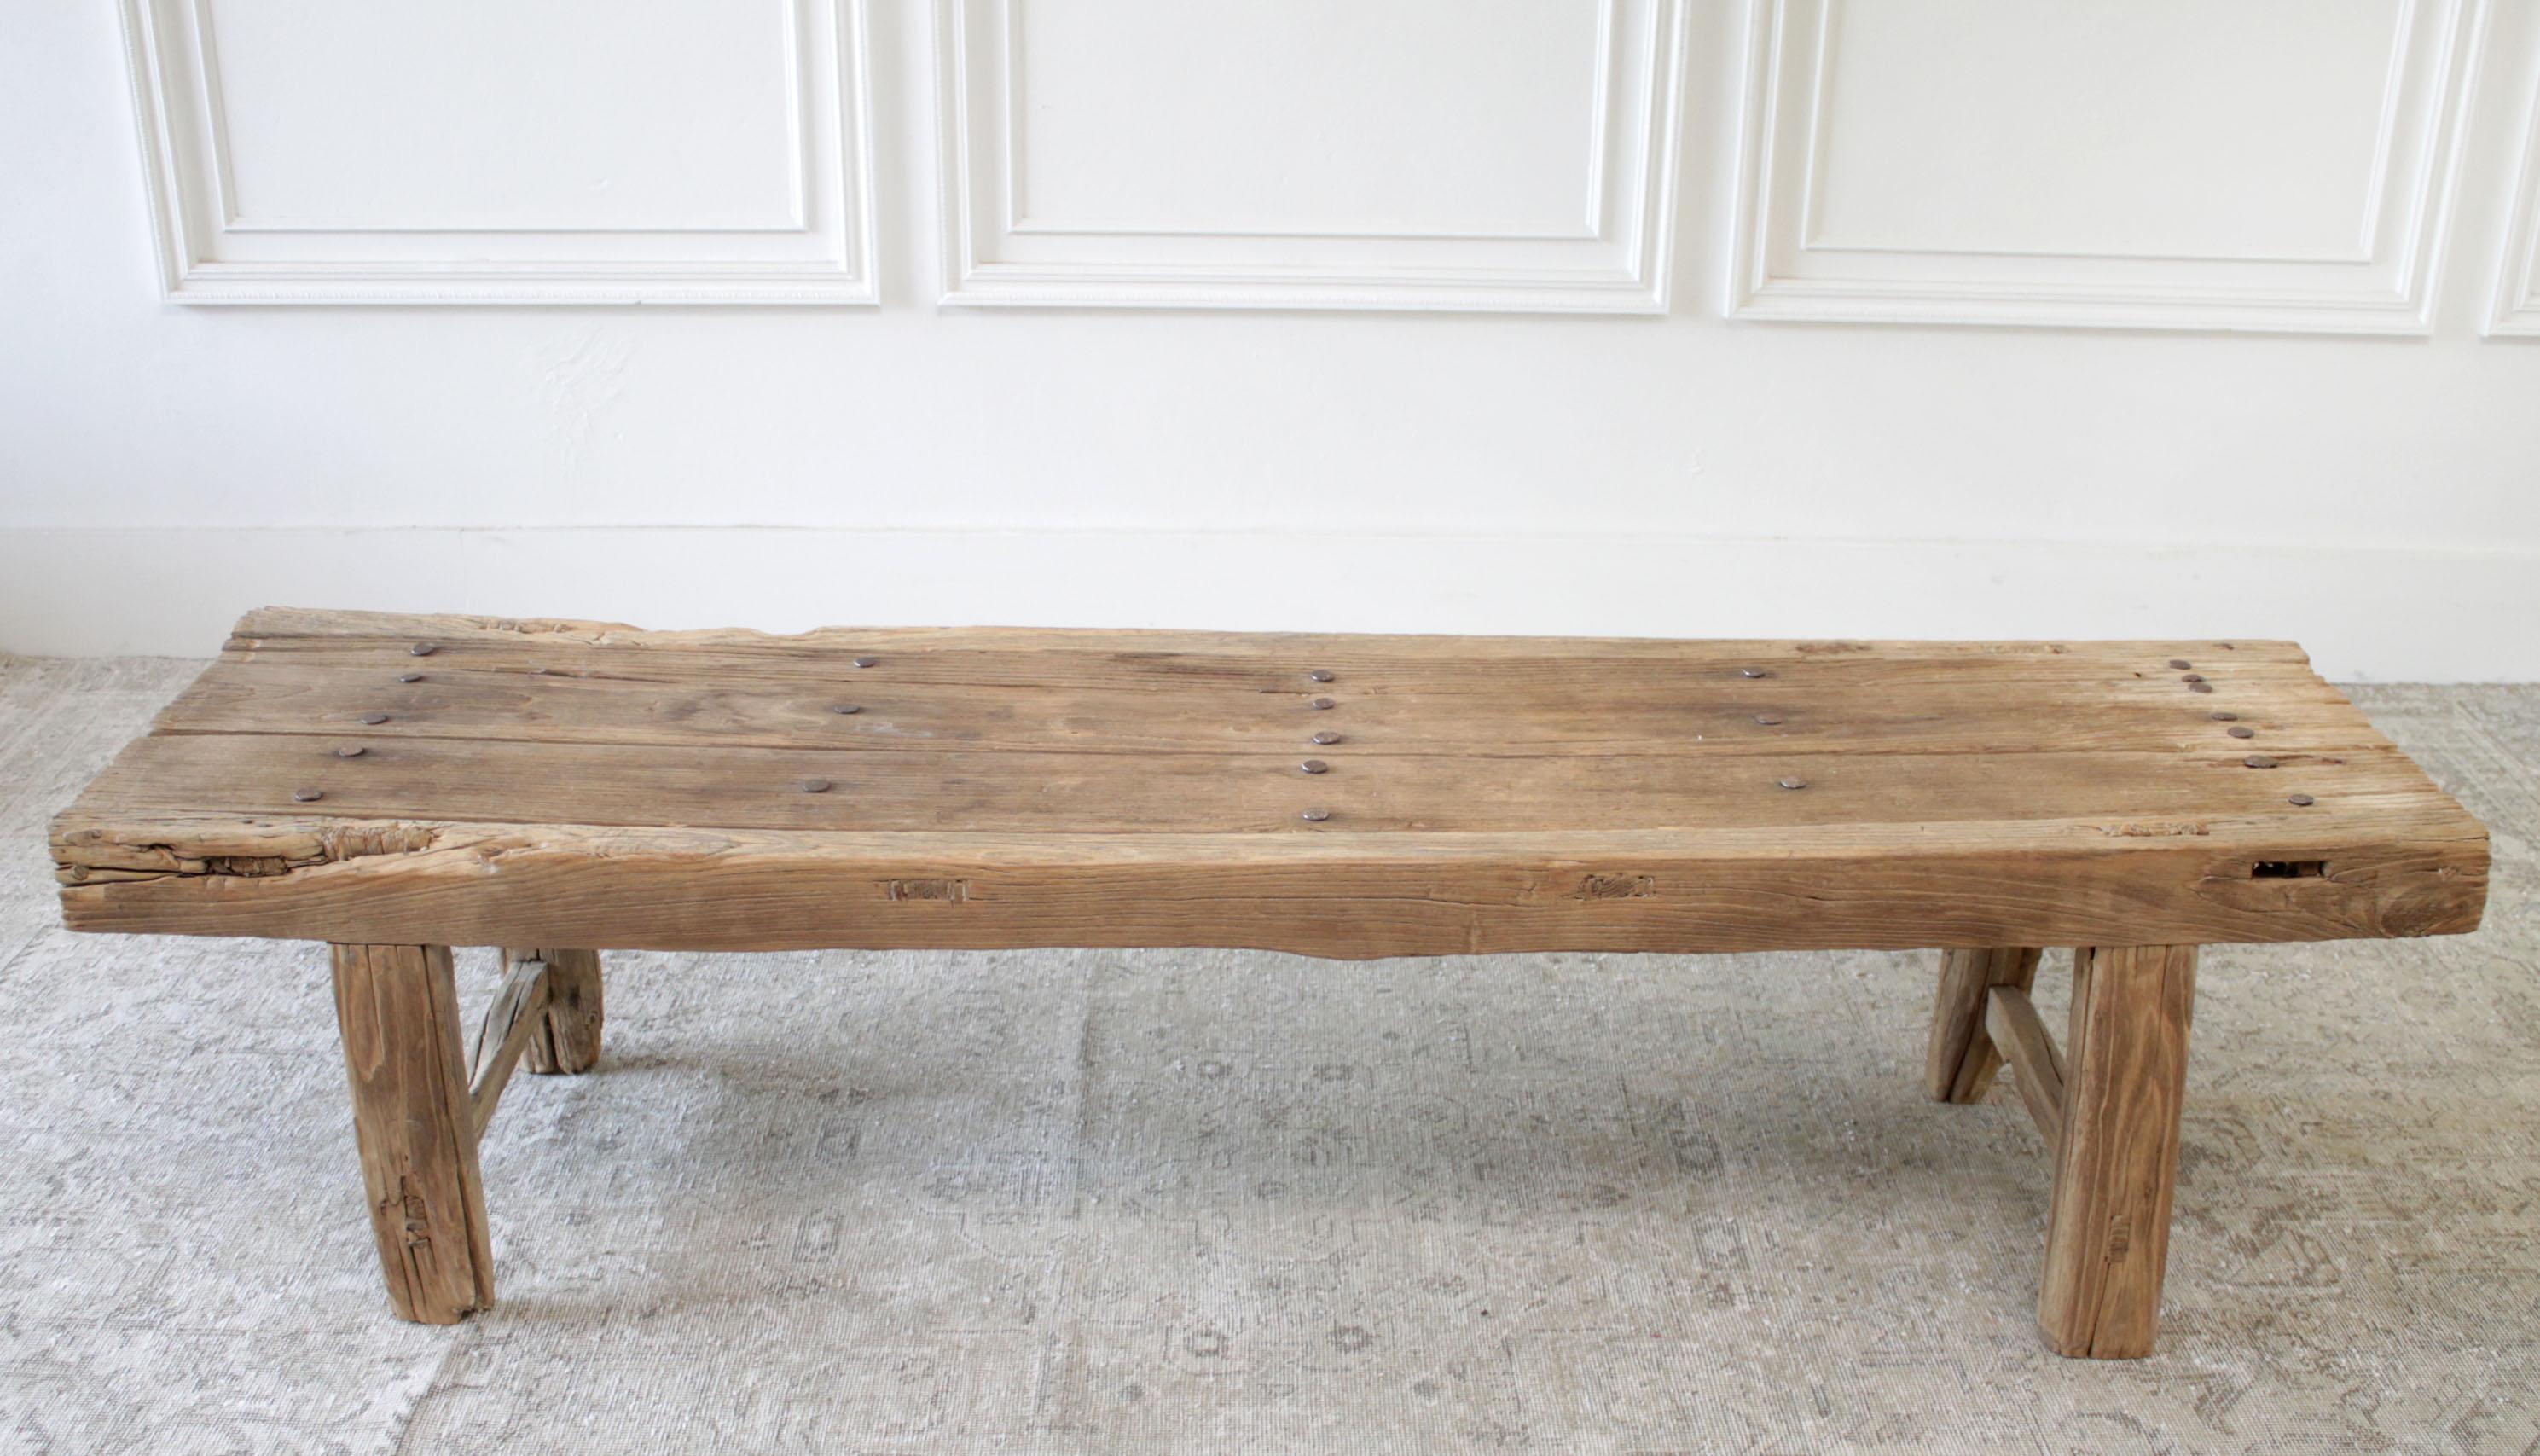 Antique elmwood rustic coffee table or bench
Over 100 years old, this rustic table is perfect for a coffee table, entry bench, or low console. Legs are solid and sturdy, ready for everyday use.
Size:
73.5